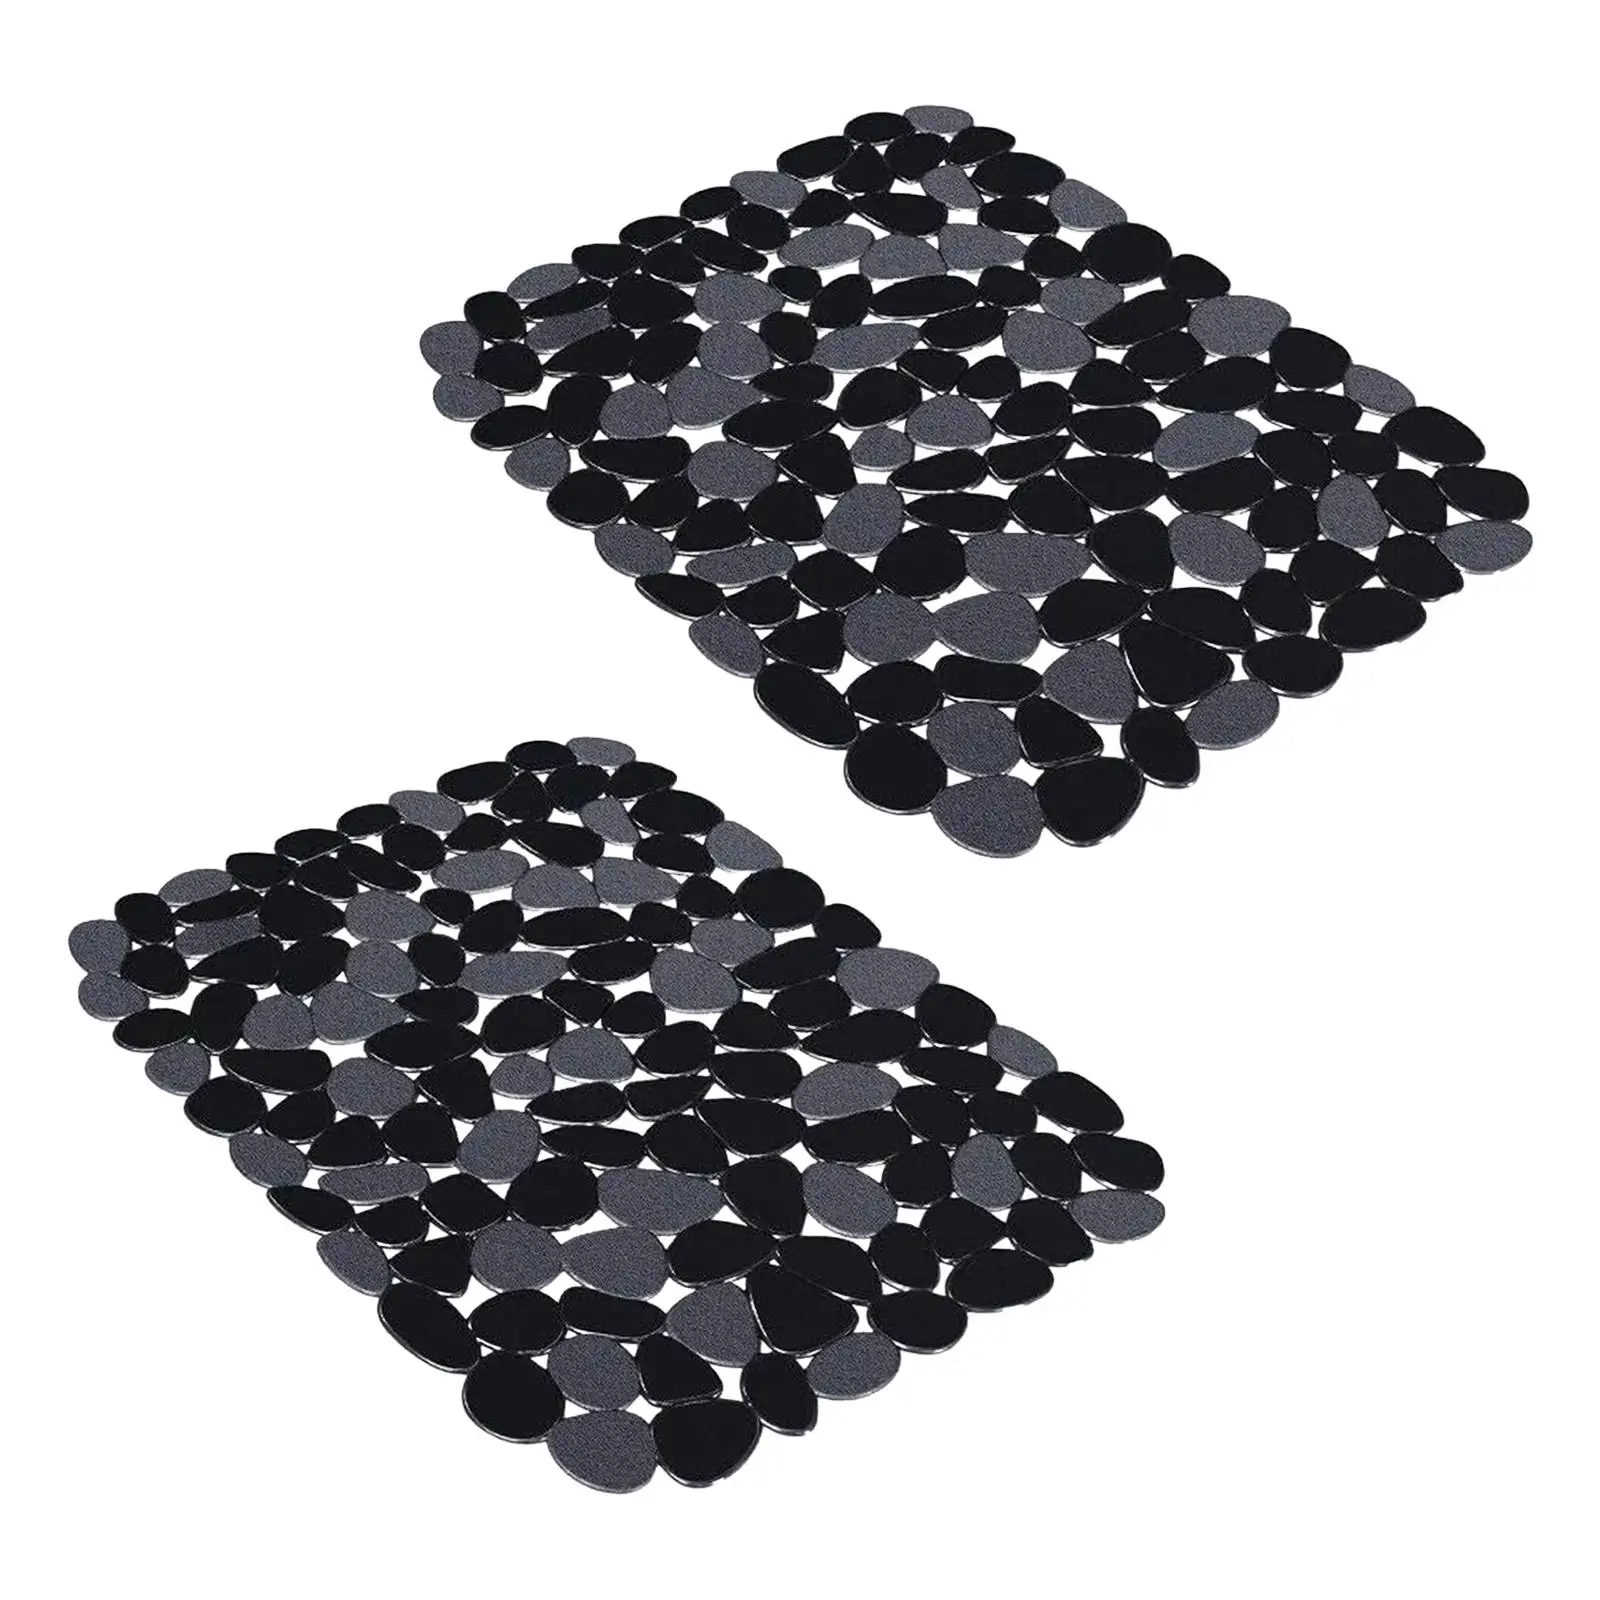 2x Pebble Sink Mat Protective Cover Drainage PVC Sink Mat Sink Protector Mat for Glassware Dishes Plates Countertop Stemware